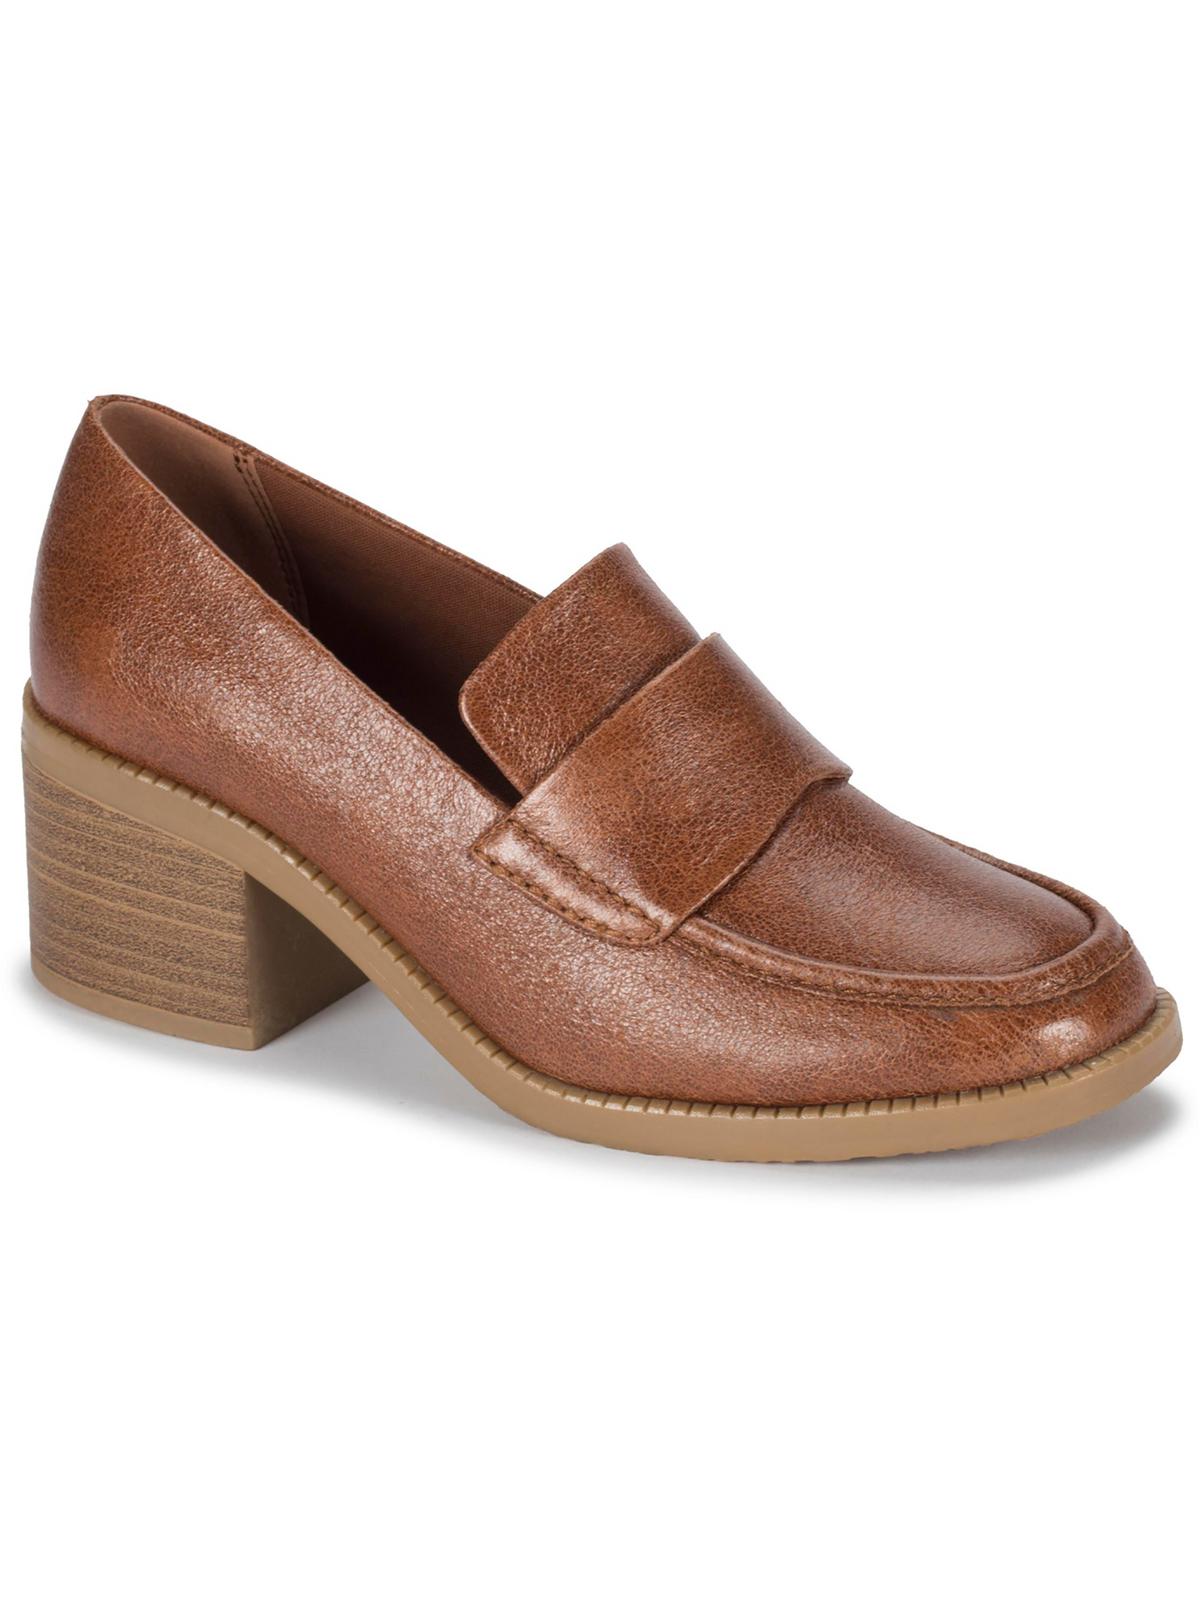 BARETRAPS ACCORD WOMENS FAUX LEATHER SLIP-ON LOAFERS